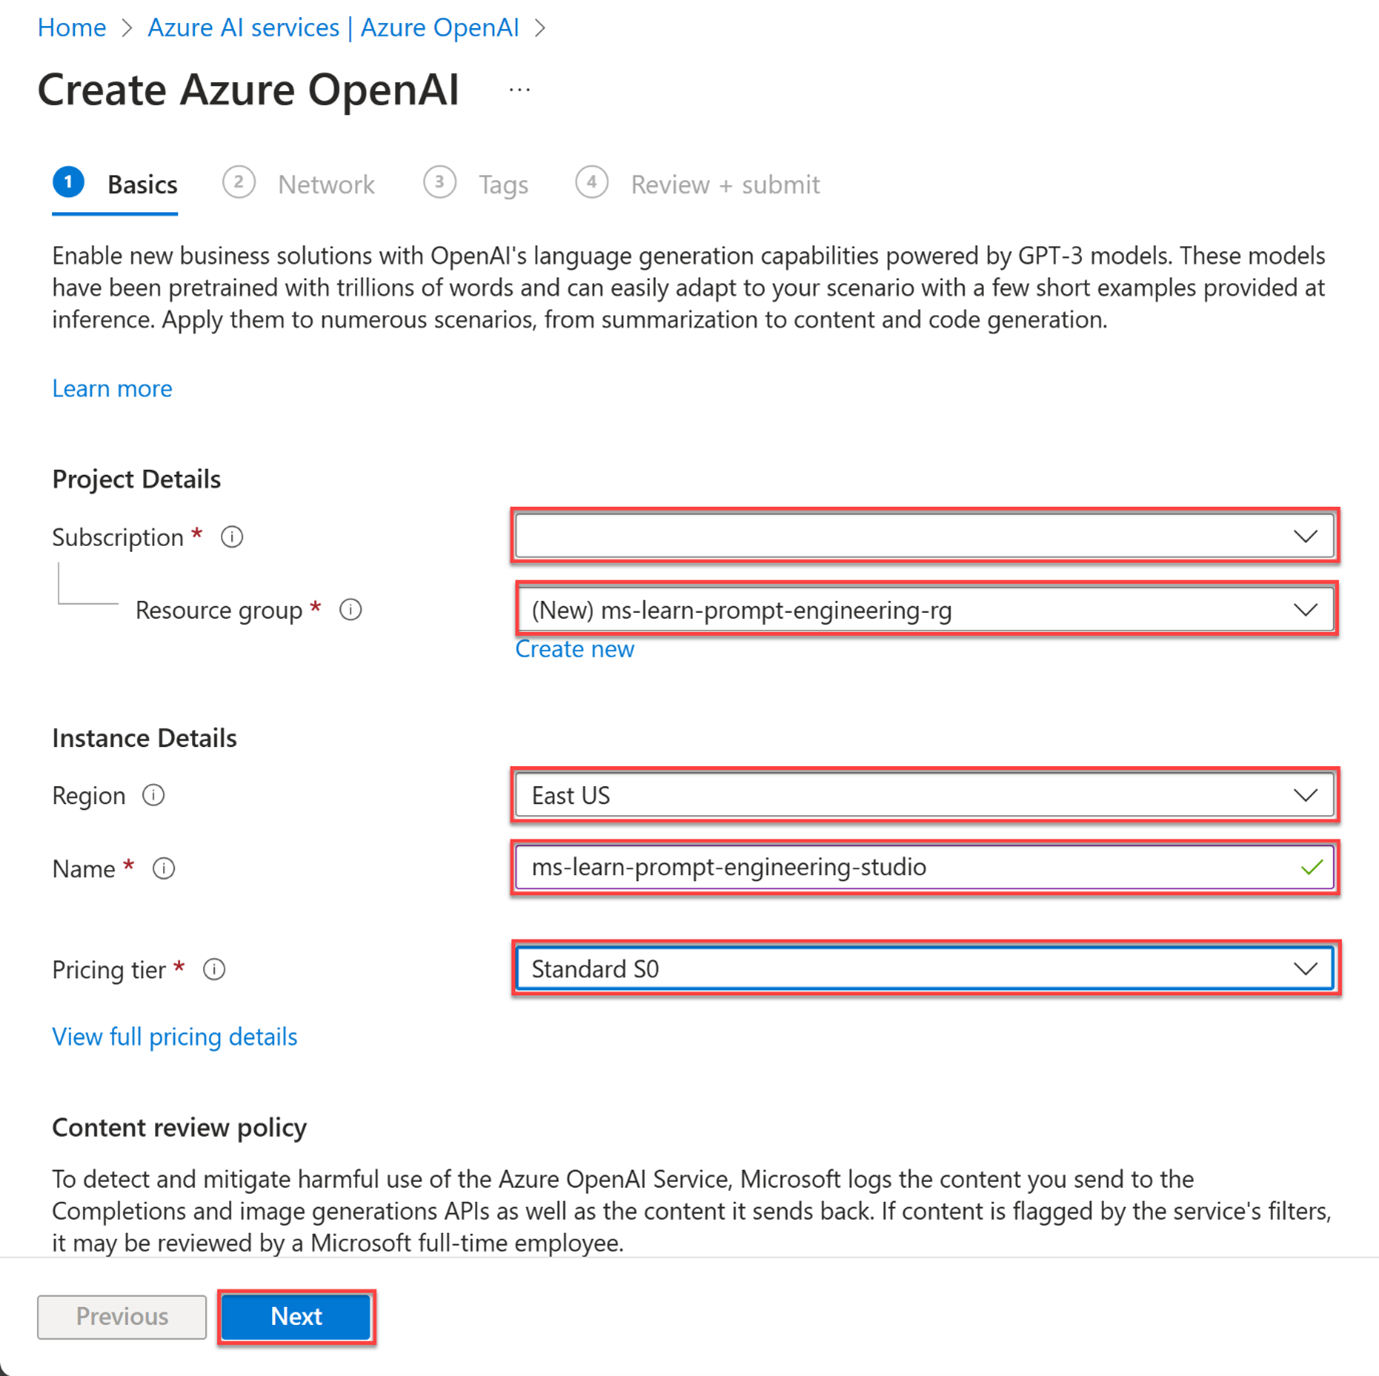 Screenshot from the Azure portal with configuration basic details of Azure OpenAI highlighted in red.